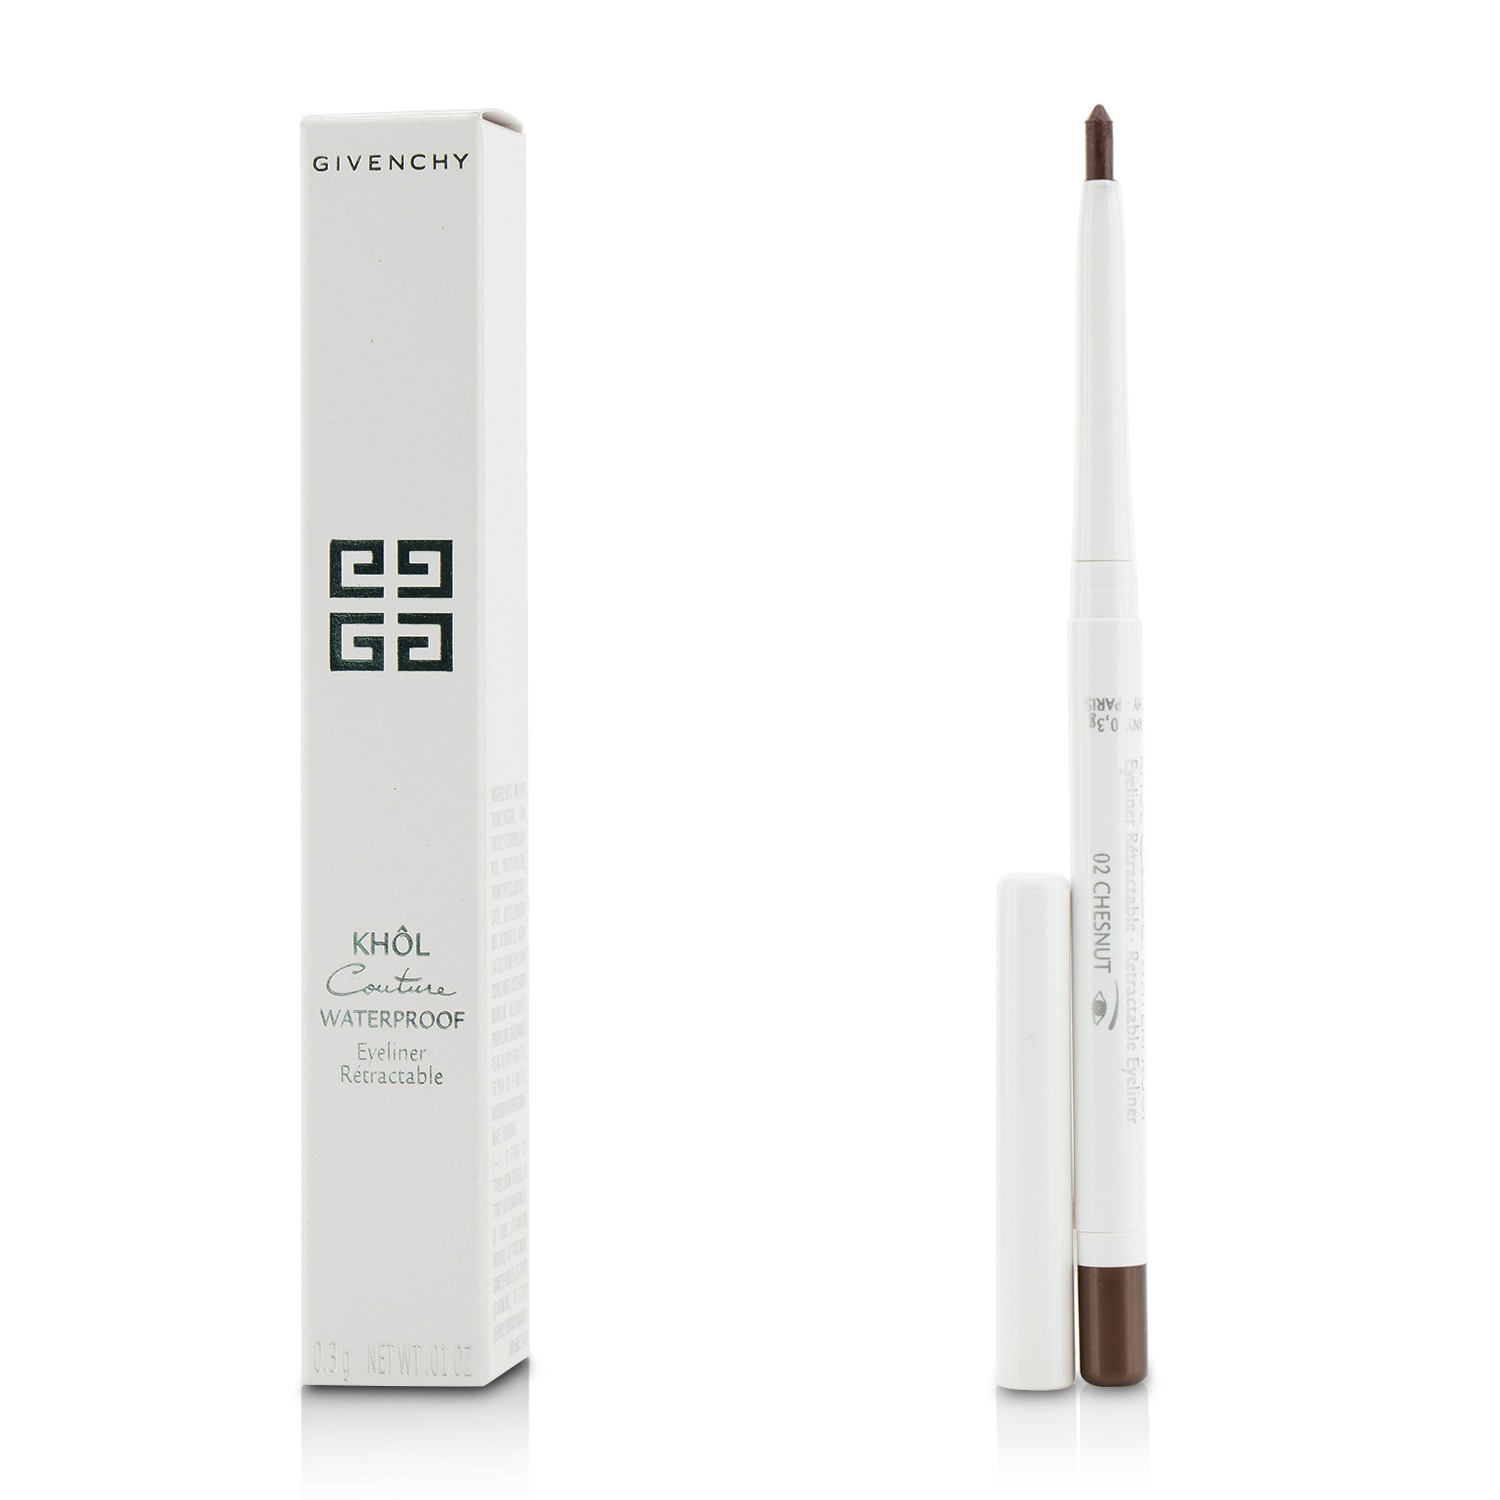 Khol Couture Waterproof Retractable Eyeliner - # 02 Chestnut Givenchy Image